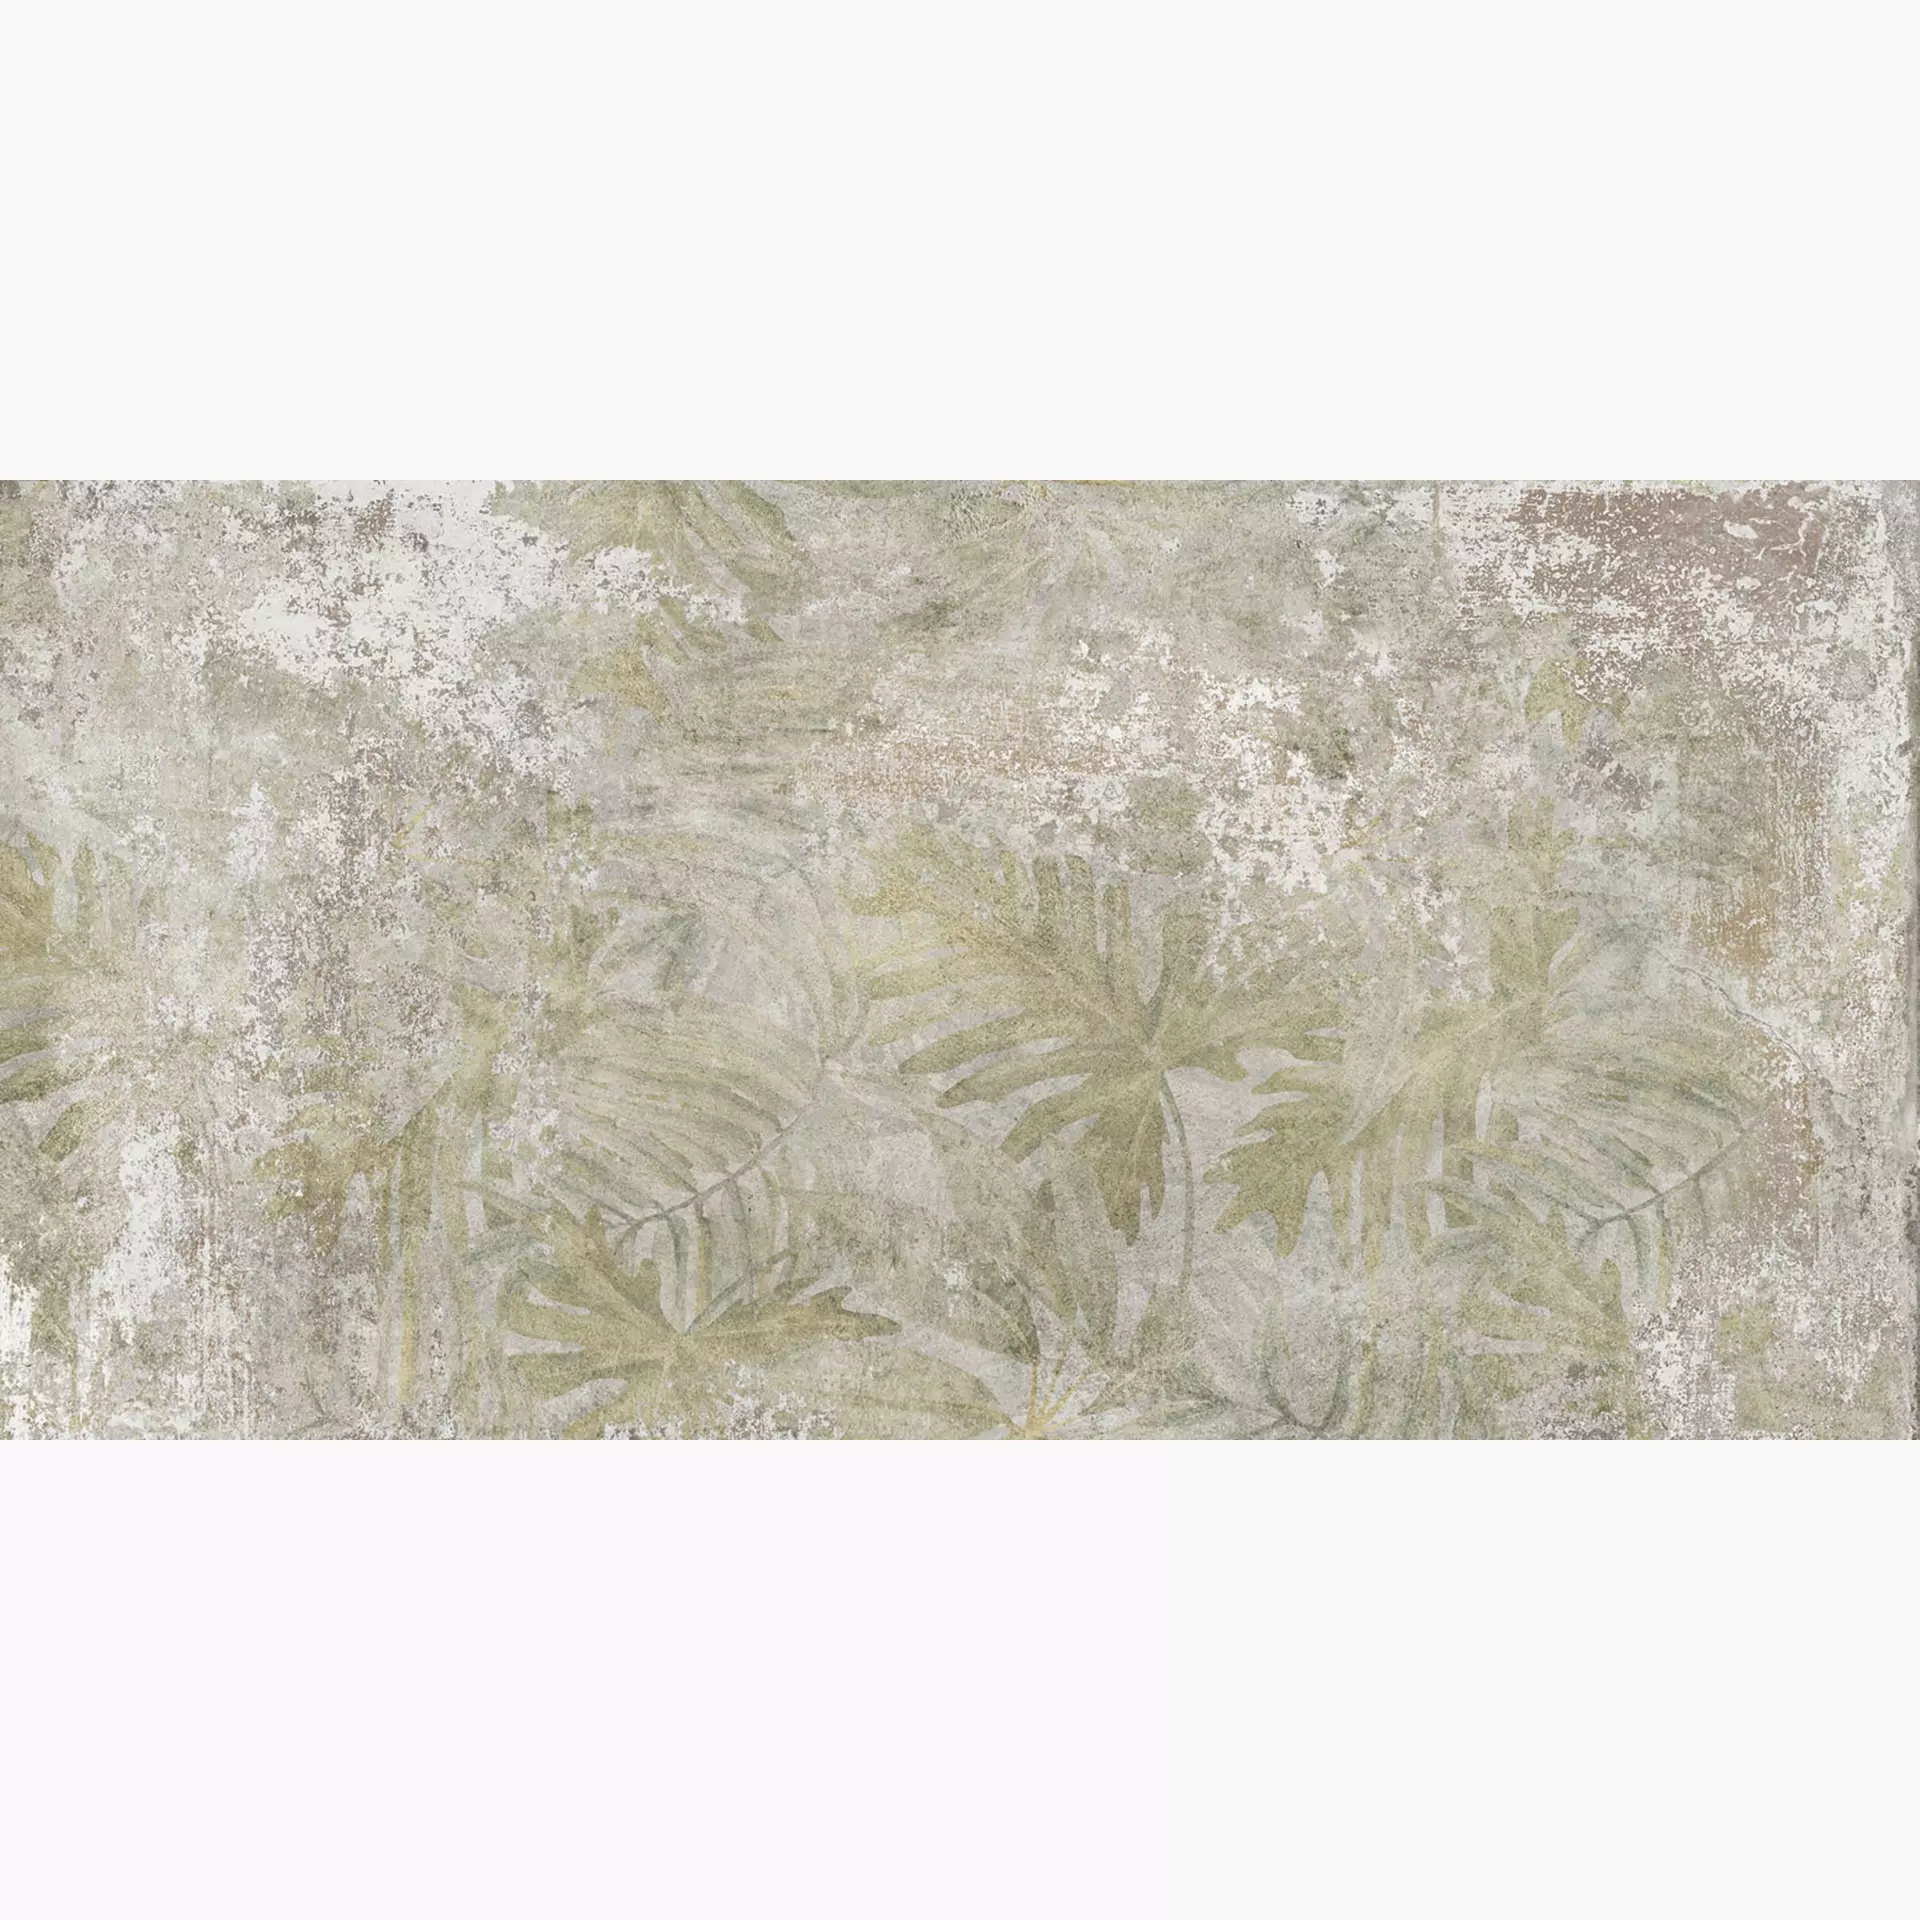 ABK Ghost Oasis Naturale Decor PF60004903 60x120cm rectified 8,5mm